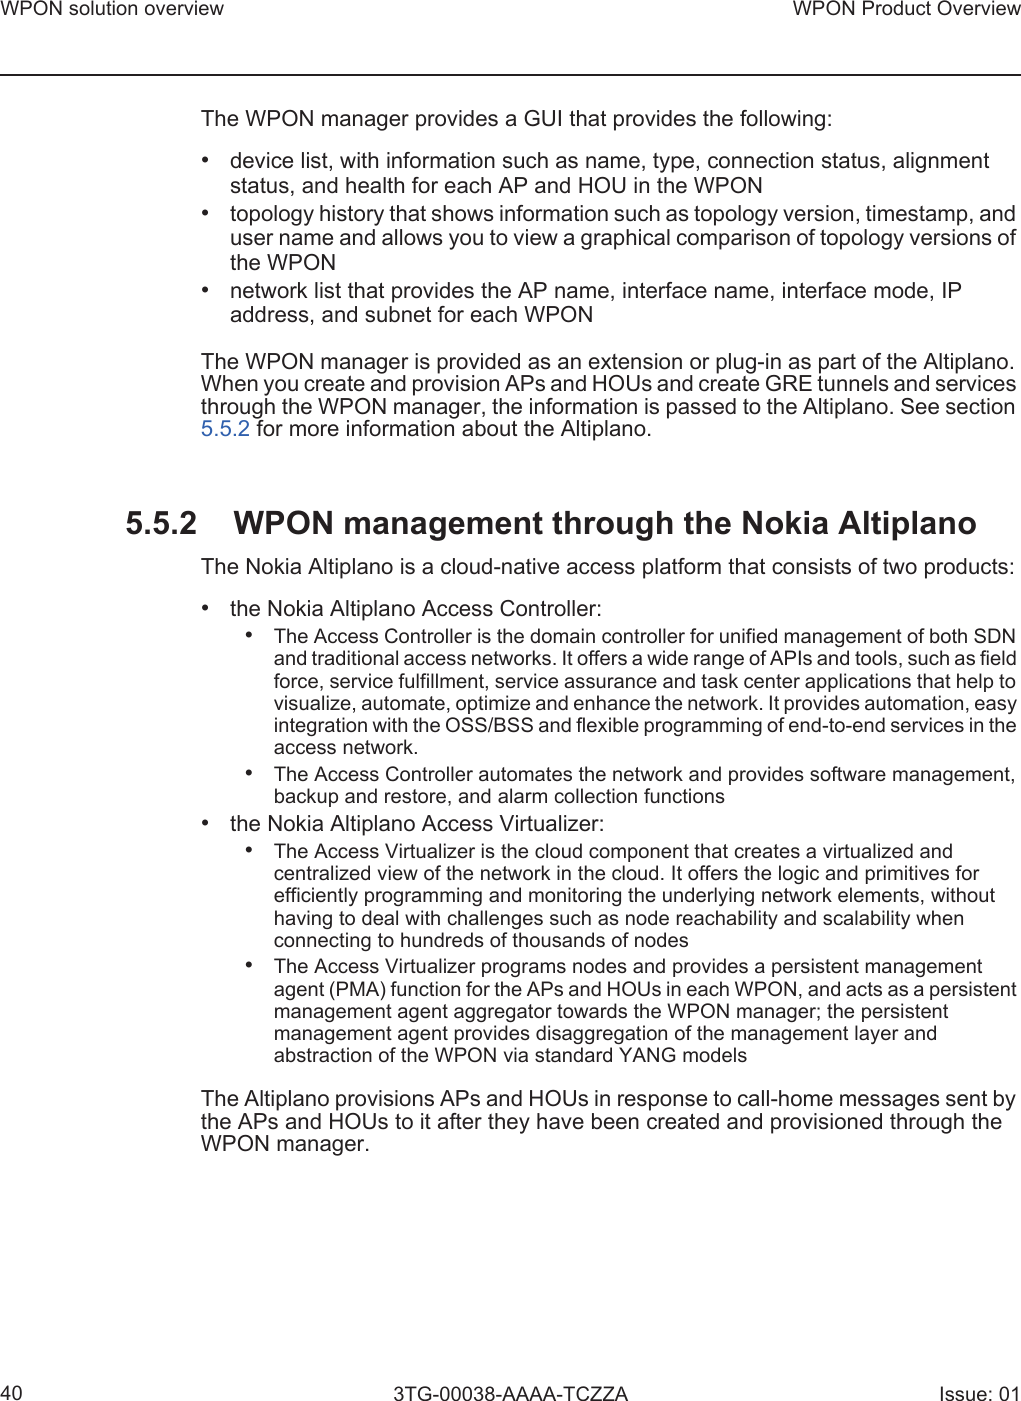 WPON solution overview40WPON Product Overview3TG-00038-AAAA-TCZZA Issue: 01The WPON manager provides a GUI that provides the following:•device list, with information such as name, type, connection status, alignmentstatus, and health for each AP and HOU in the WPON•topology history that shows information such as topology version, timestamp, anduser name and allows you to view a graphical comparison of topology versions ofthe WPON•network list that provides the AP name, interface name, interface mode, IPaddress, and subnet for each WPONThe WPON manager is provided as an extension or plug-in as part of the Altiplano. When you create and provision APs and HOUs and create GRE tunnels and services through the WPON manager, the information is passed to the Altiplano. See section 5.5.2 for more information about the Altiplano.5.5.2 WPON management through the Nokia AltiplanoThe Nokia Altiplano is a cloud-native access platform that consists of two products: •the Nokia Altiplano Access Controller:•The Access Controller is the domain controller for unified management of both SDNand traditional access networks. It offers a wide range of APIs and tools, such as fieldforce, service fulfillment, service assurance and task center applications that help tovisualize, automate, optimize and enhance the network. It provides automation, easyintegration with the OSS/BSS and flexible programming of end-to-end services in theaccess network.•The Access Controller automates the network and provides software management,backup and restore, and alarm collection functions•the Nokia Altiplano Access Virtualizer:•The Access Virtualizer is the cloud component that creates a virtualized andcentralized view of the network in the cloud. It offers the logic and primitives forefficiently programming and monitoring the underlying network elements, withouthaving to deal with challenges such as node reachability and scalability whenconnecting to hundreds of thousands of nodes•The Access Virtualizer programs nodes and provides a persistent managementagent (PMA) function for the APs and HOUs in each WPON, and acts as a persistentmanagement agent aggregator towards the WPON manager; the persistentmanagement agent provides disaggregation of the management layer andabstraction of the WPON via standard YANG modelsThe Altiplano provisions APs and HOUs in response to call-home messages sent by the APs and HOUs to it after they have been created and provisioned through the WPON manager.